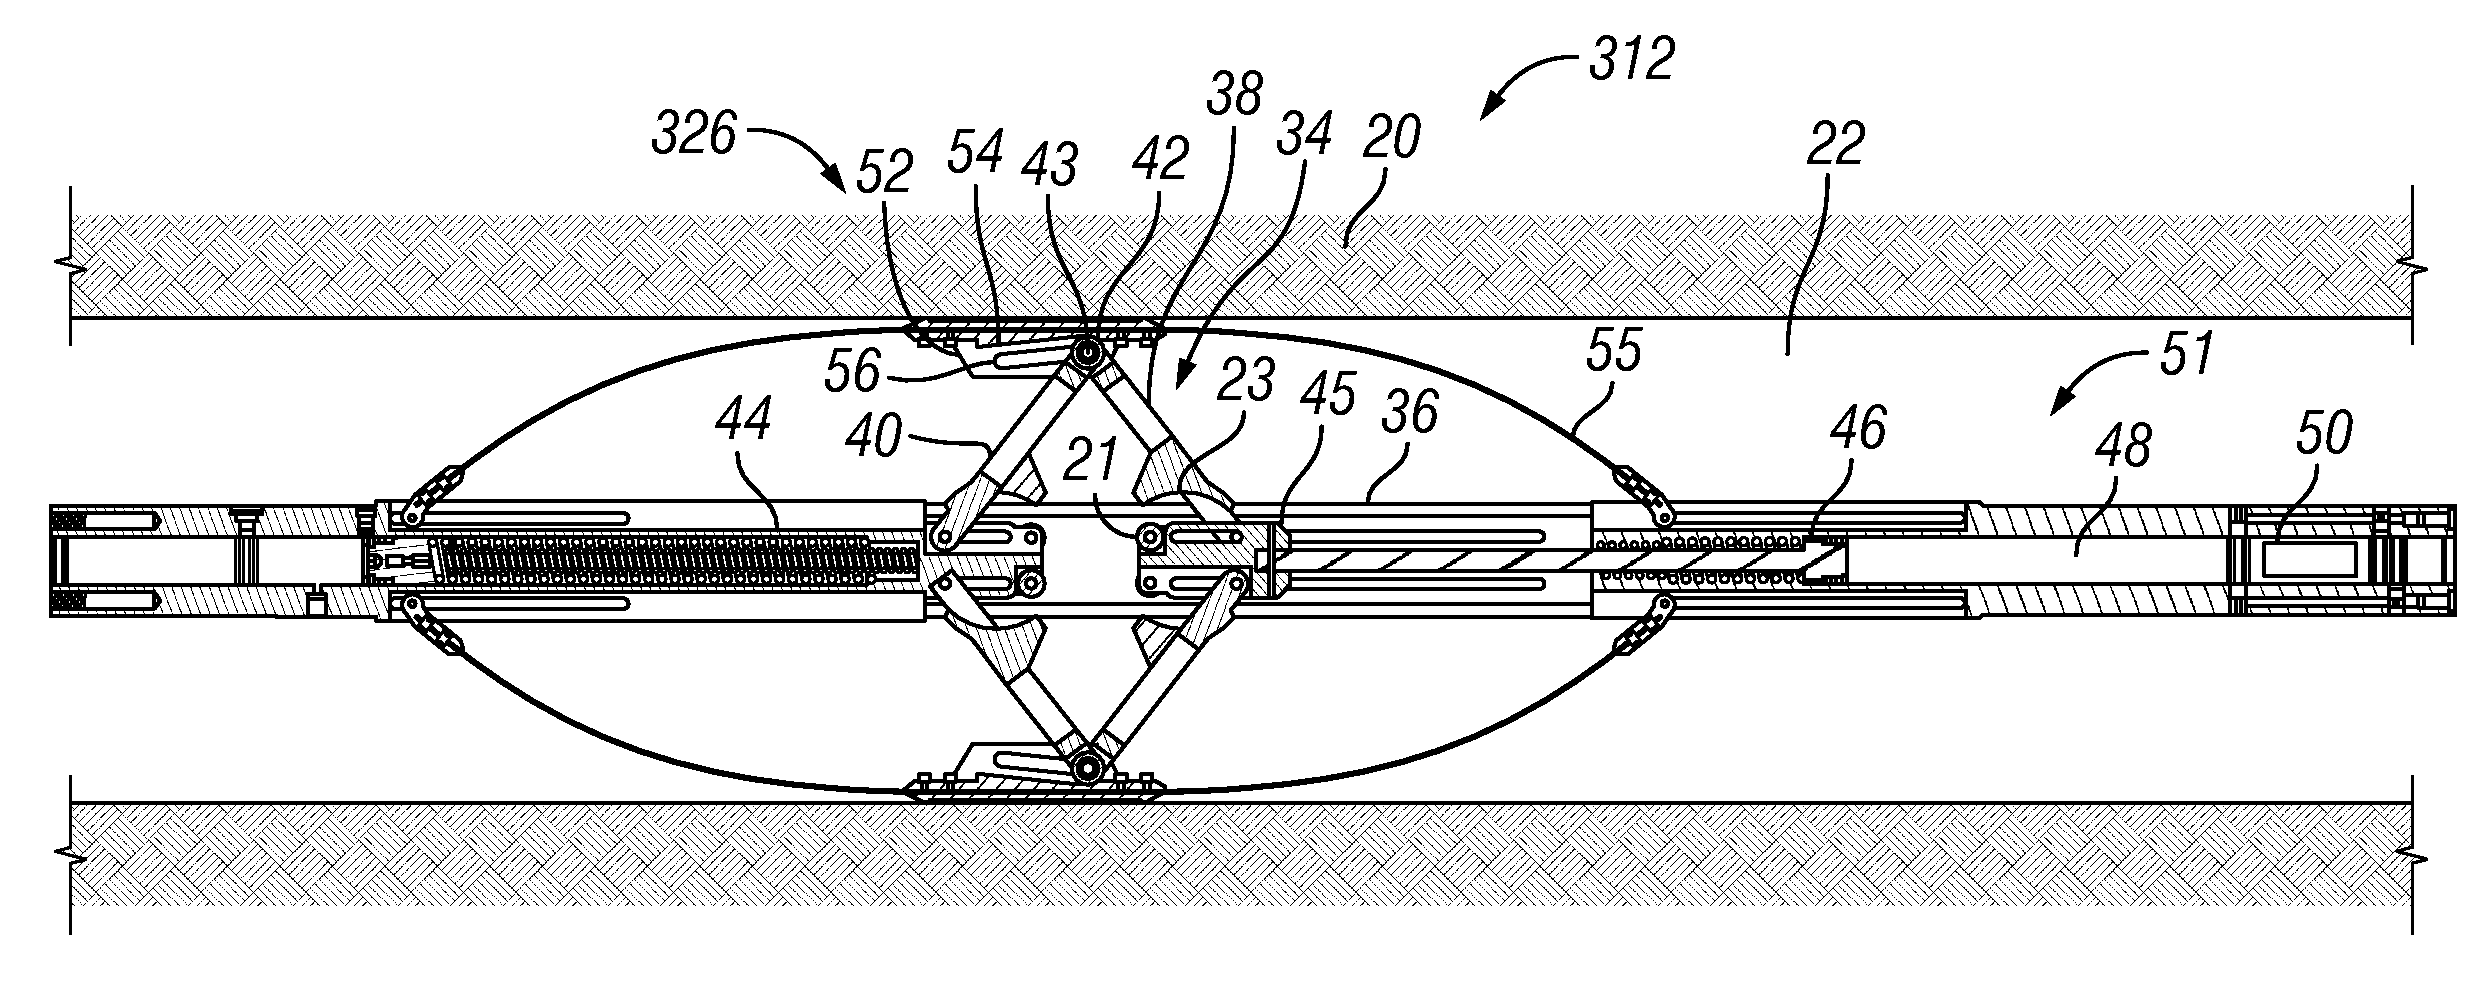 Self-anchoring device with force amplification